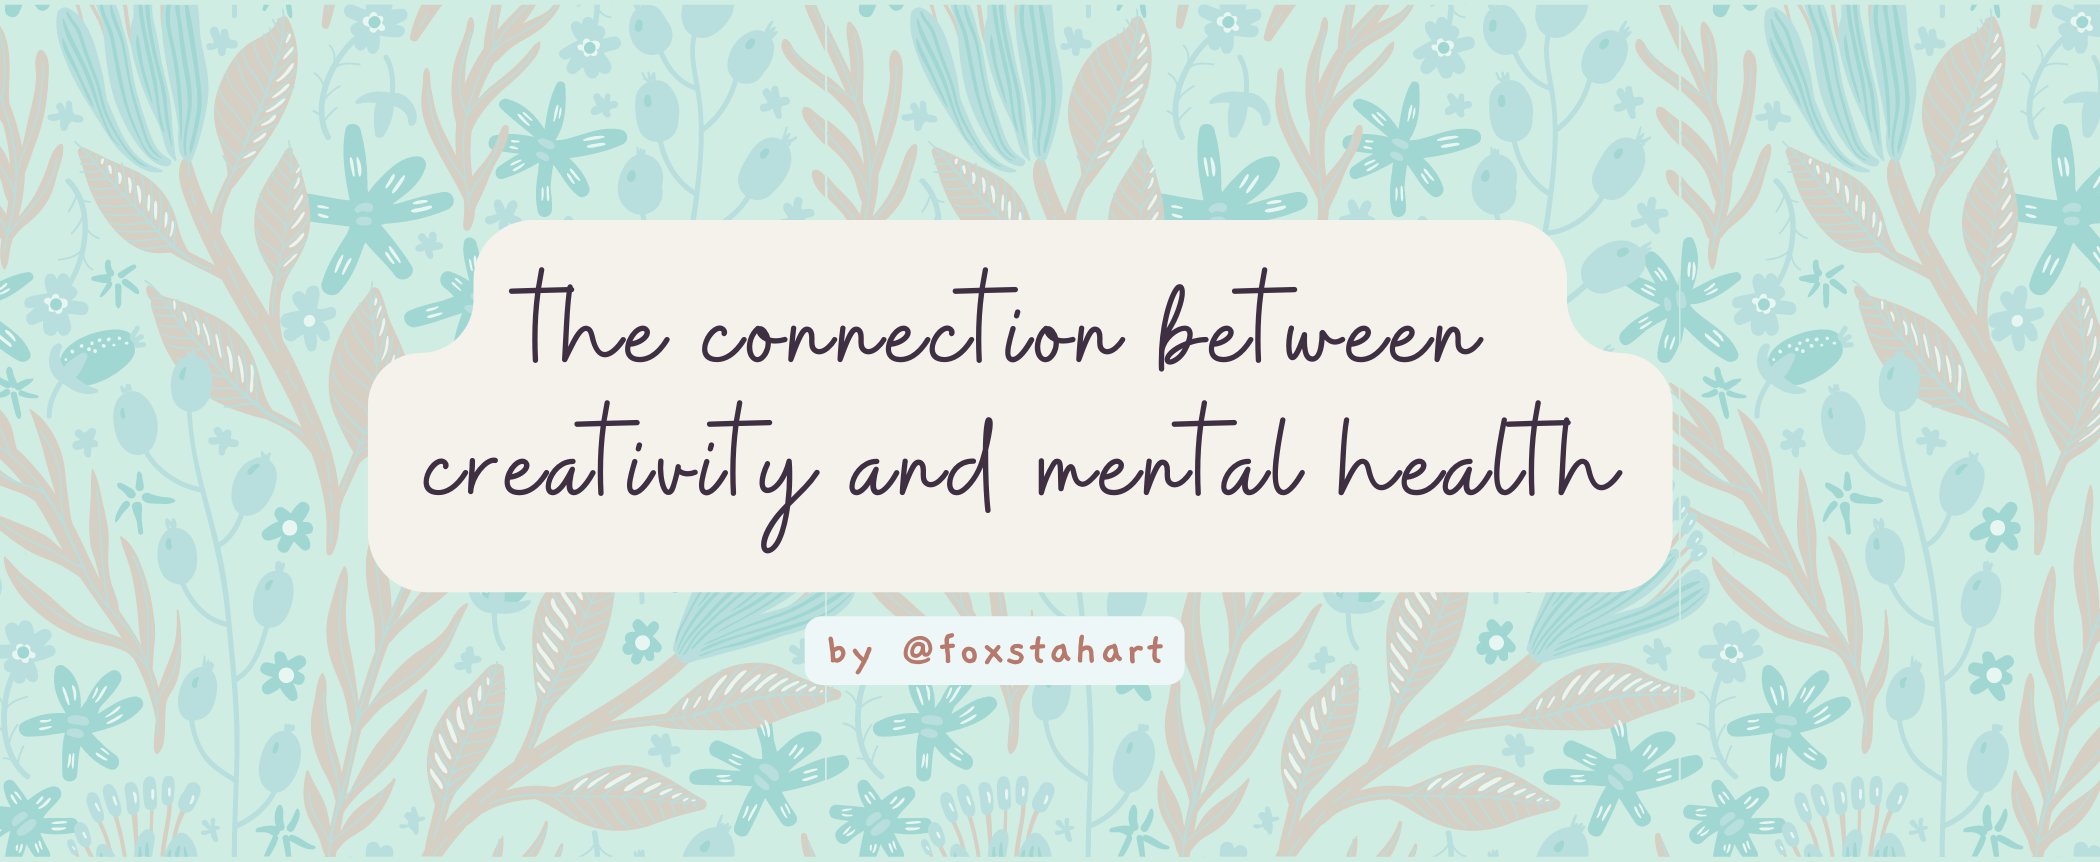 the connection between creativity and mental health @foxstahart